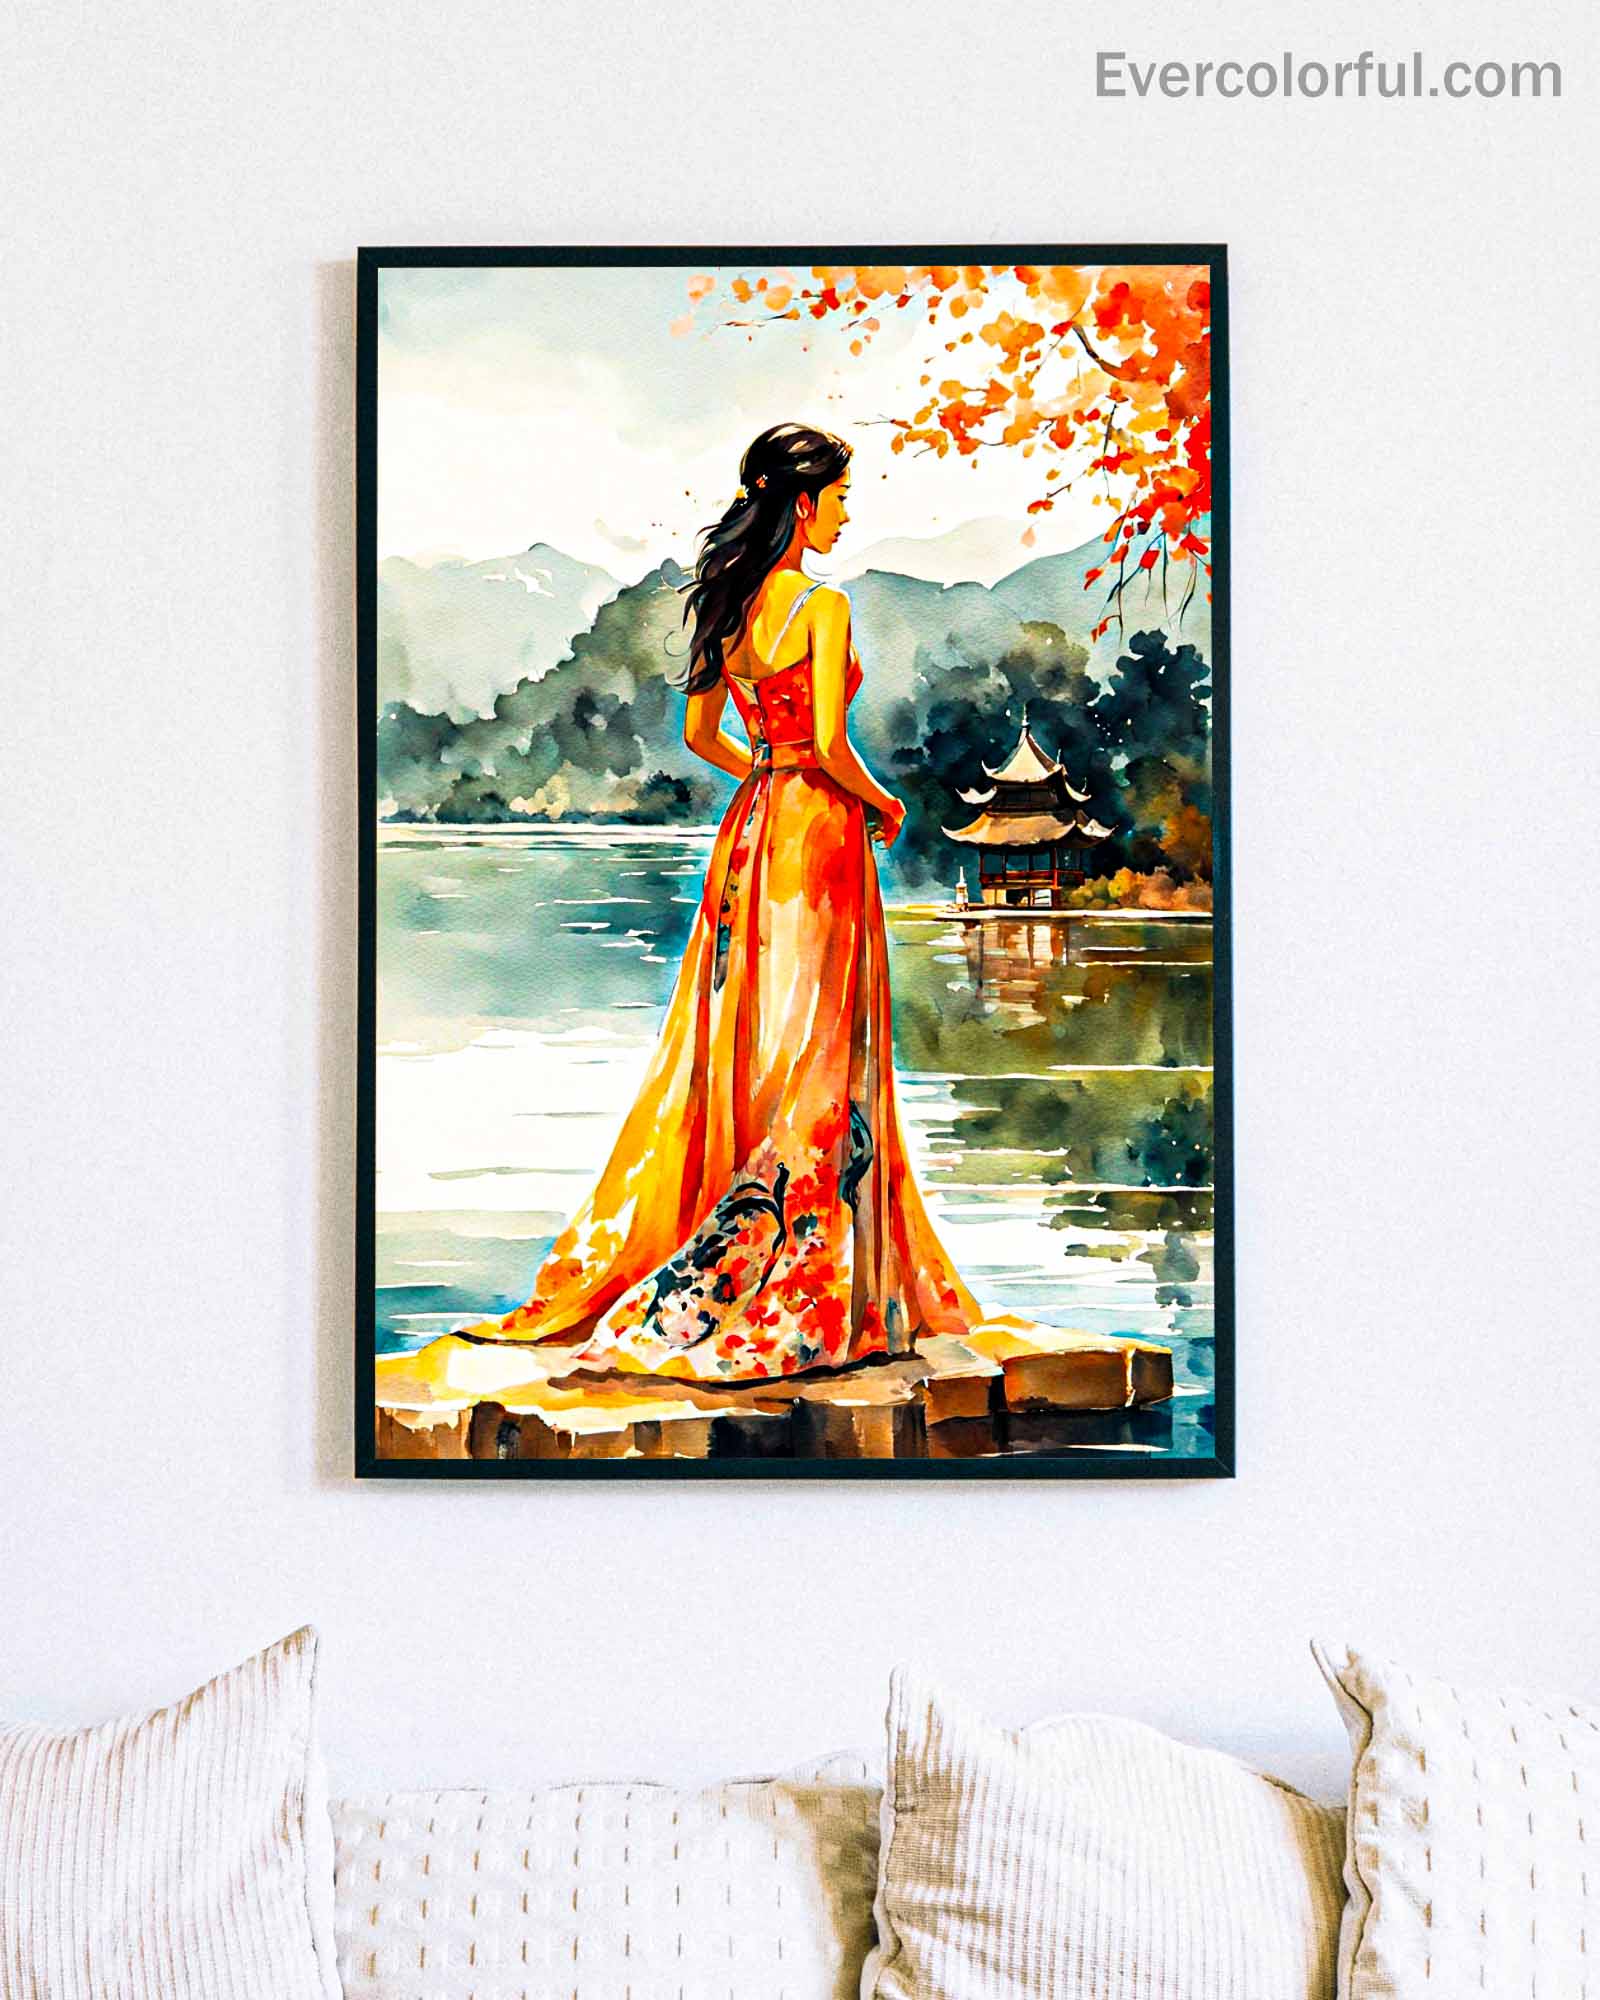 Beautiful tranquillity - Poster - Ever colorful